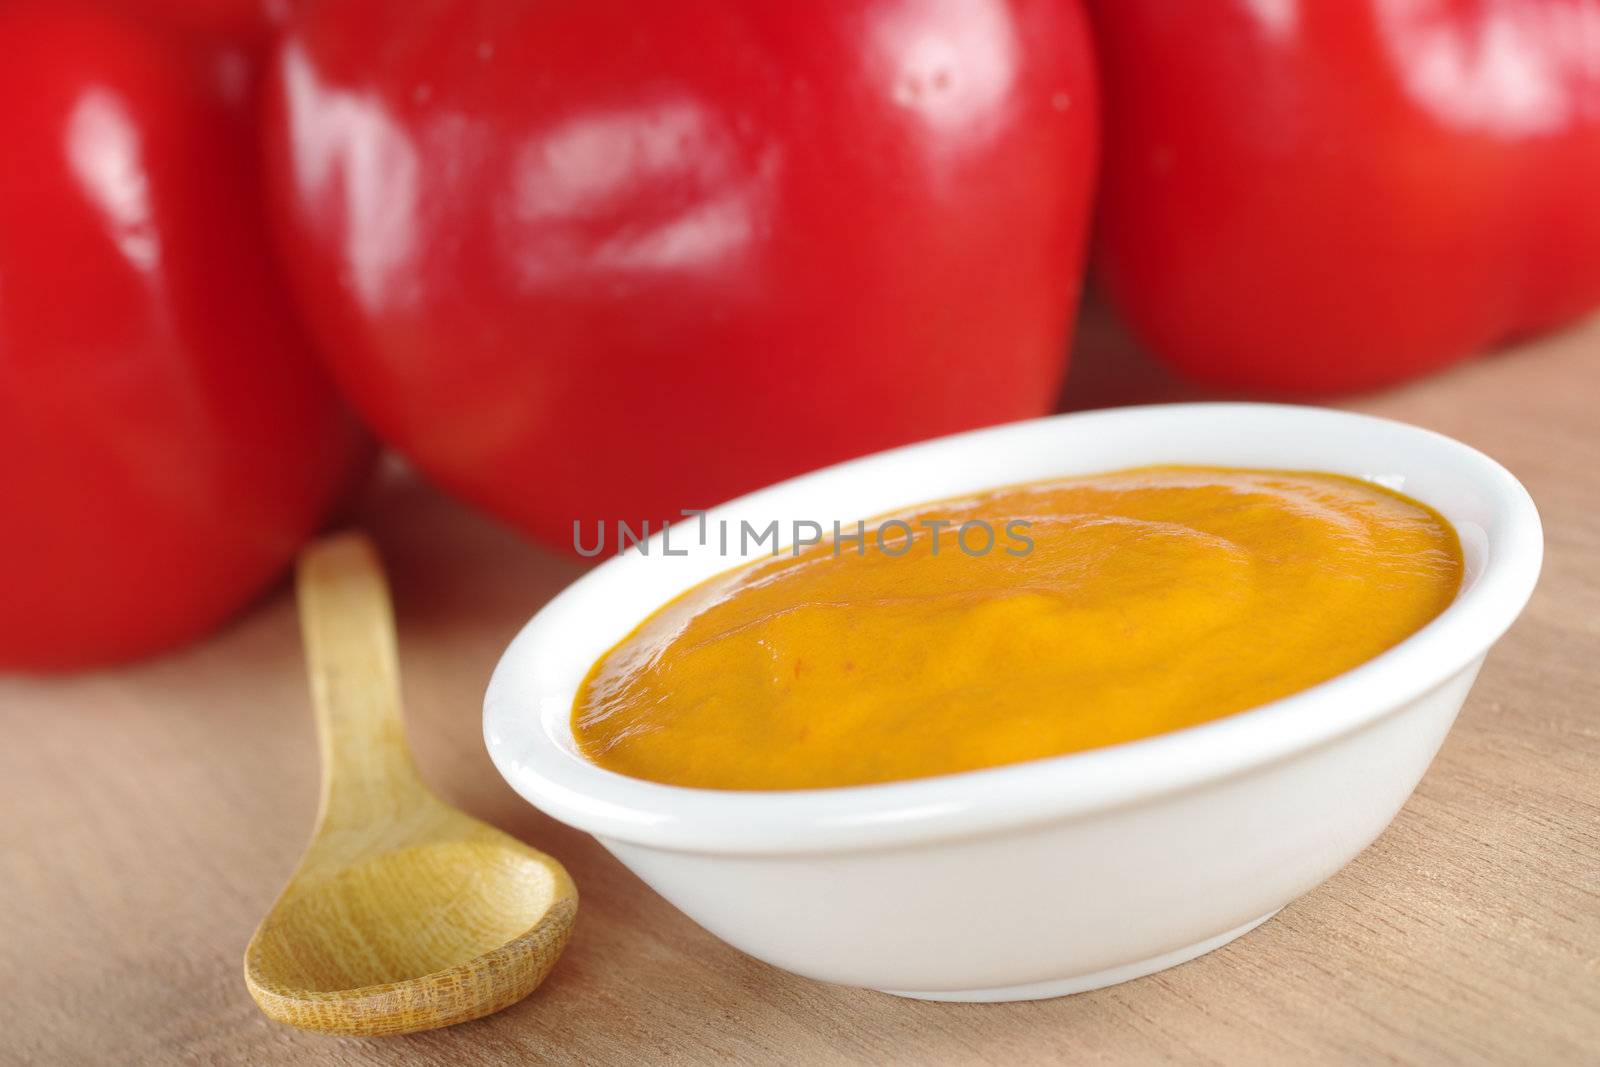 Peruvian hot salsa made of a red pepper called rocoto which is visible in the background (Selective Focus, Focus on the middle of the sauce)